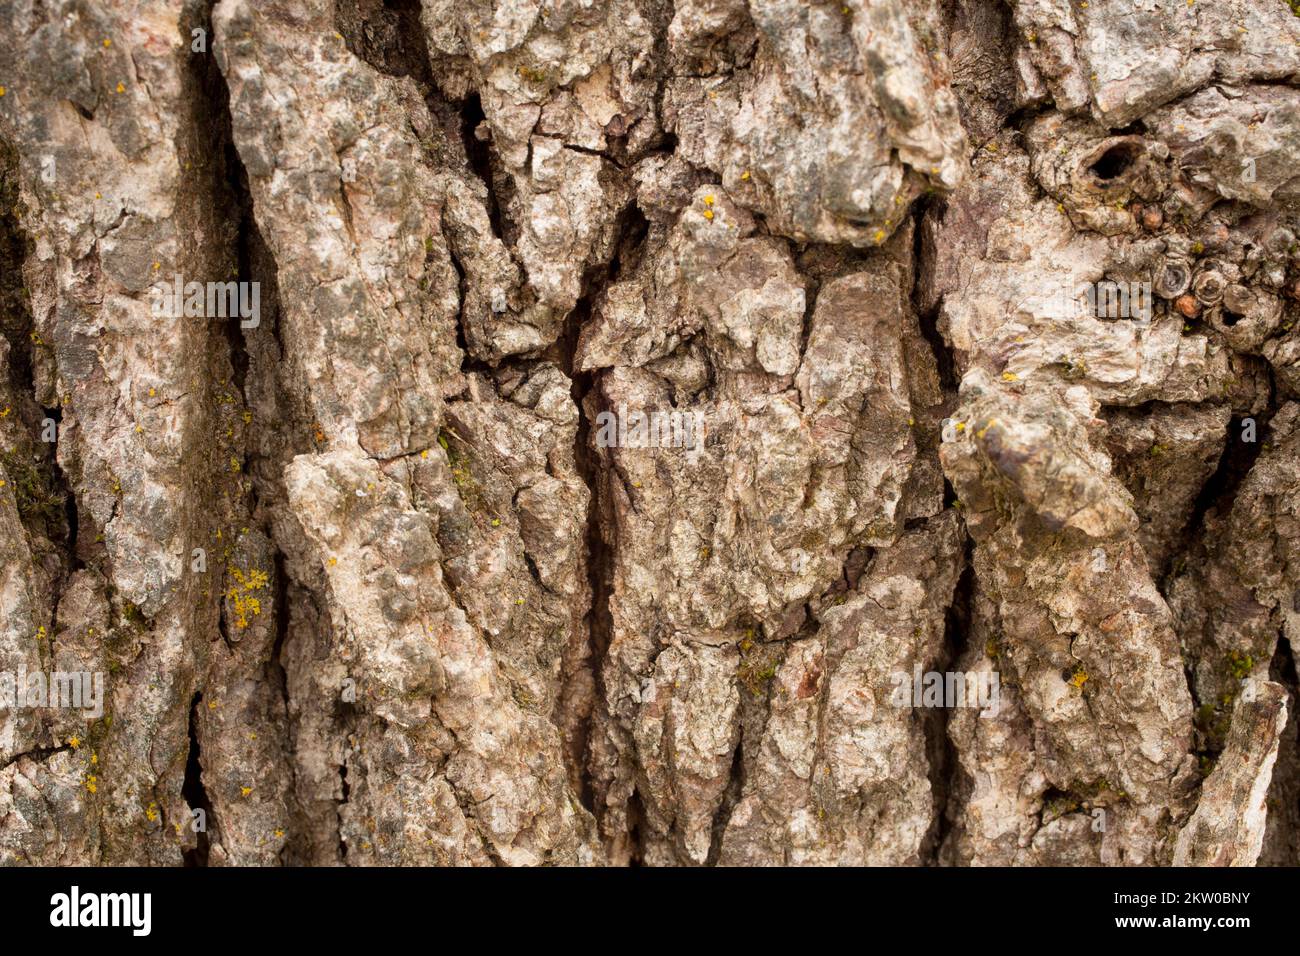 Detail of furrowed bark on a white oak tree, Quercus alba, in Troy, Montana. This tree species is not indigenous to the region in which it was found g Stock Photo